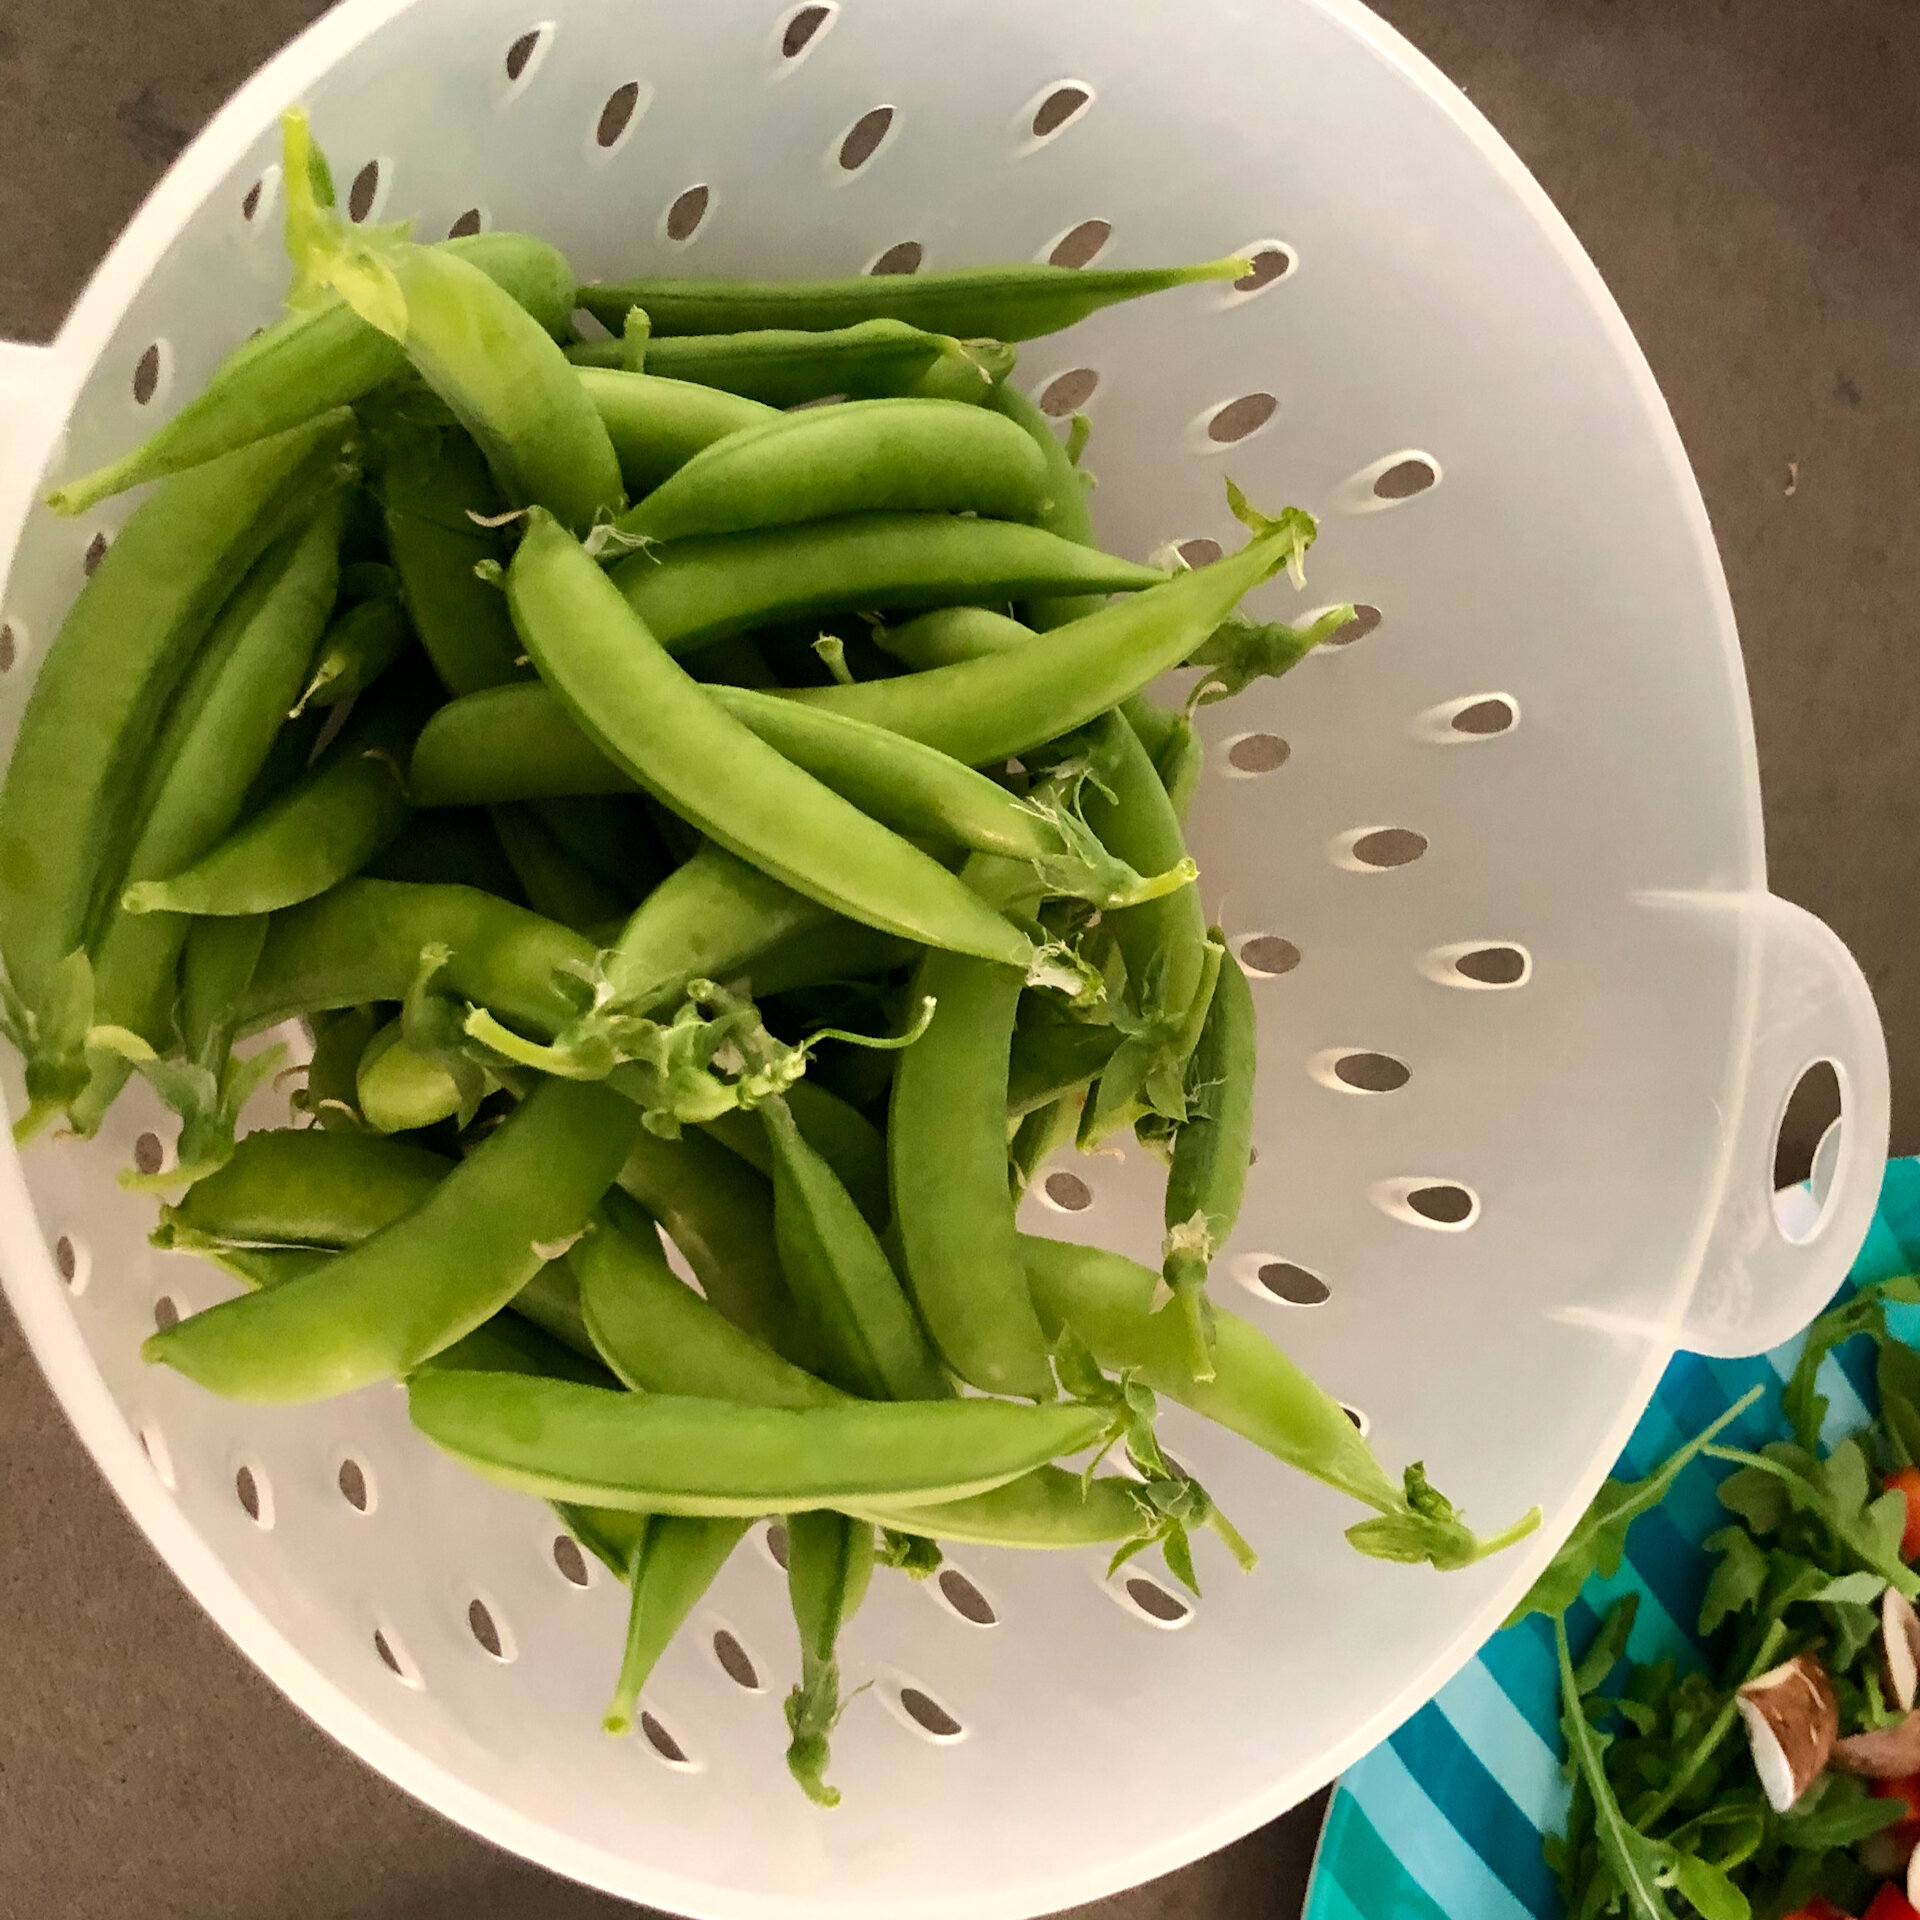  One of the three harvests of peas we’ve had so far this spring. 